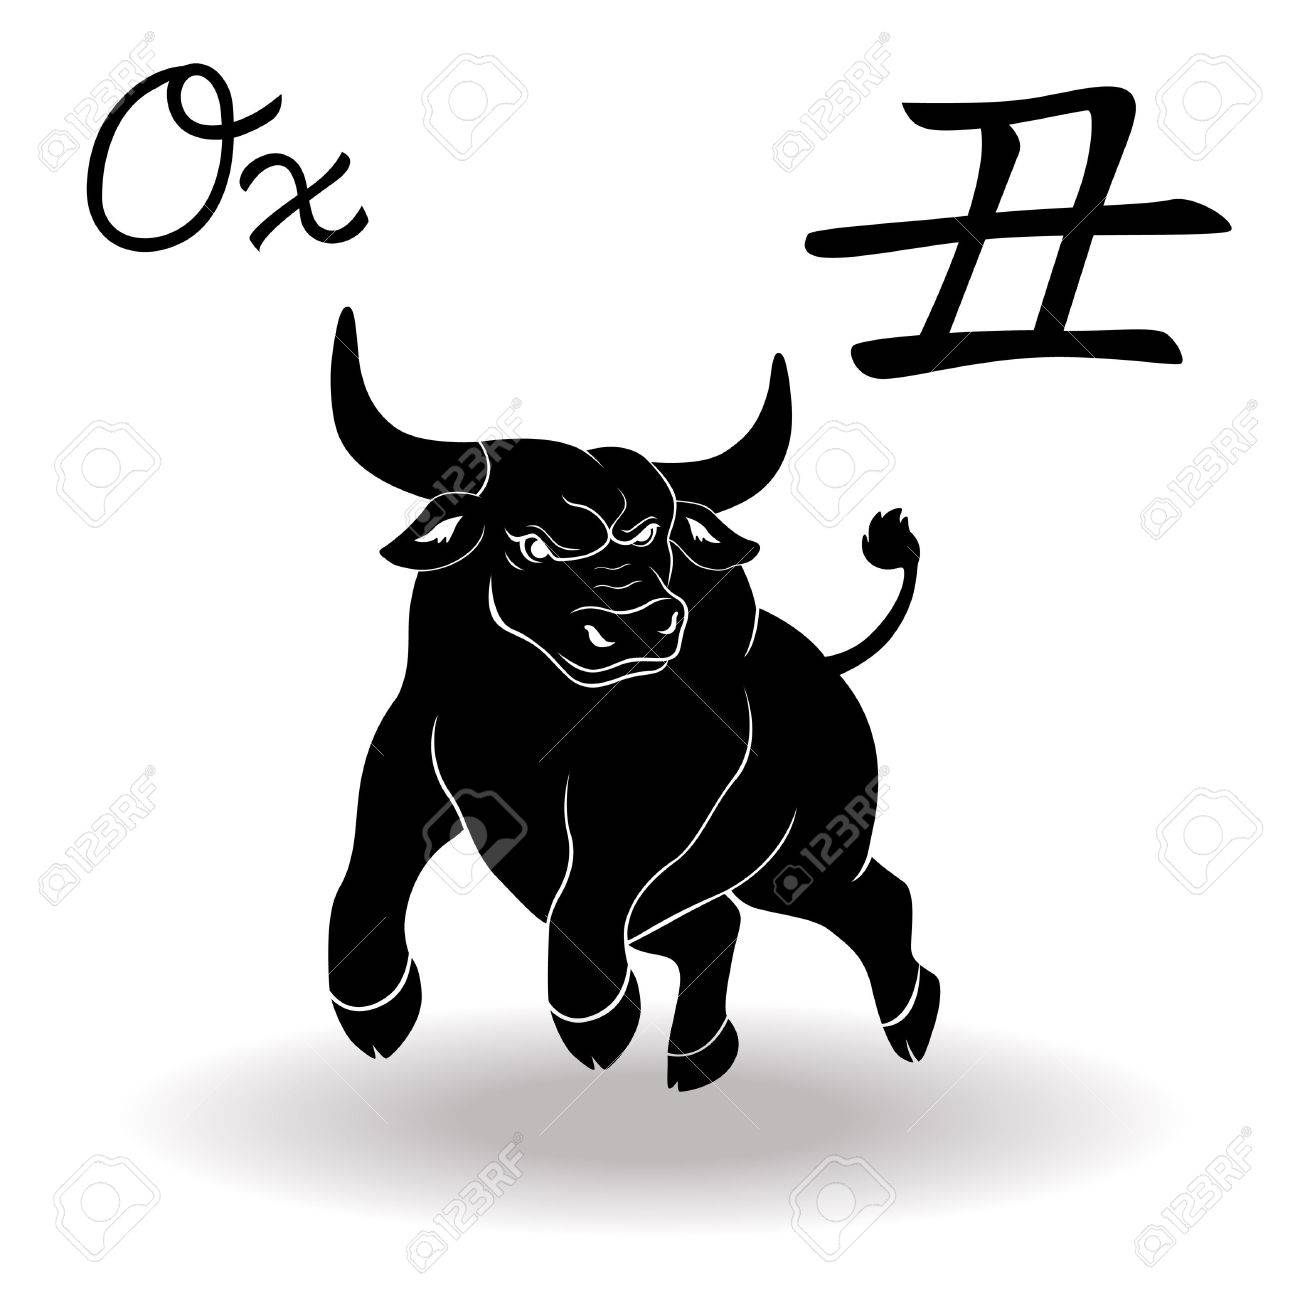 Chinese Zodiac Sign Ox, Fixed Element Earth, Symbol Of New Year..